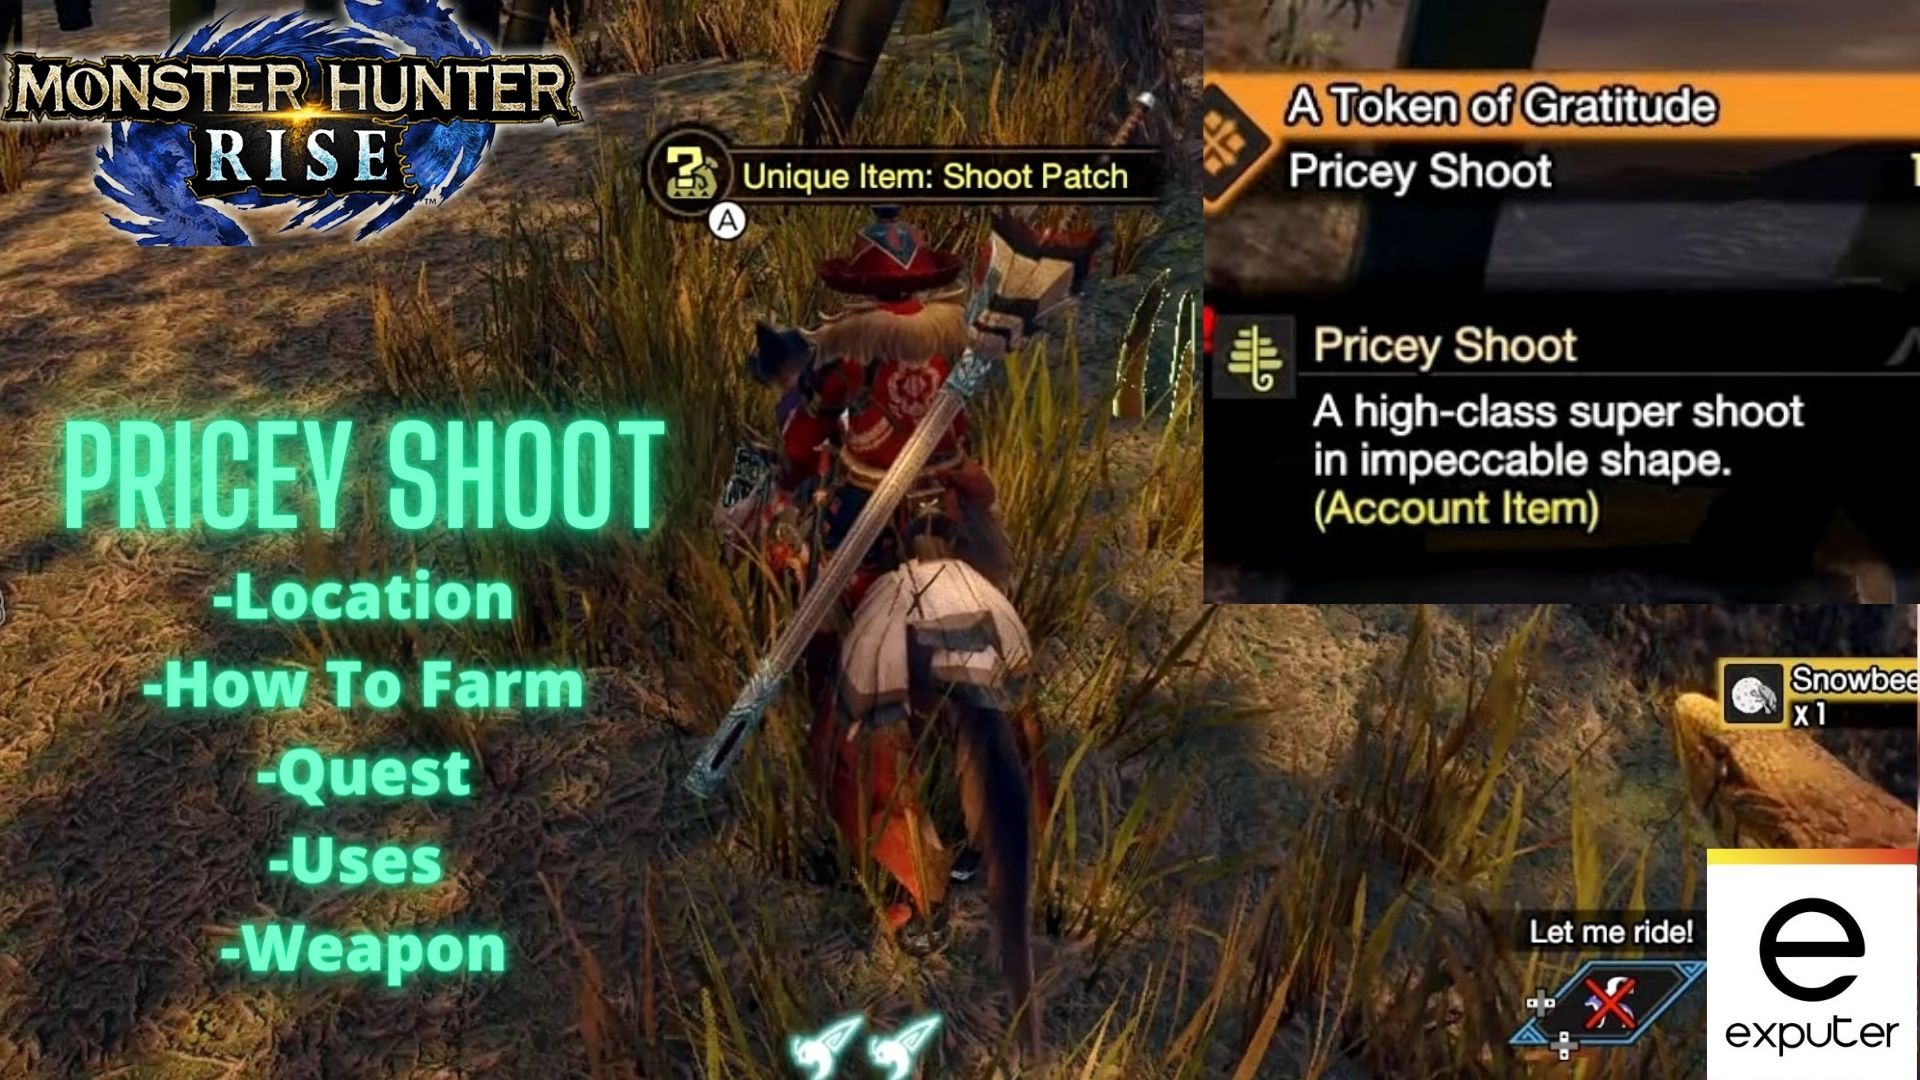 Pricey Shoot in Monster Hunter Rise